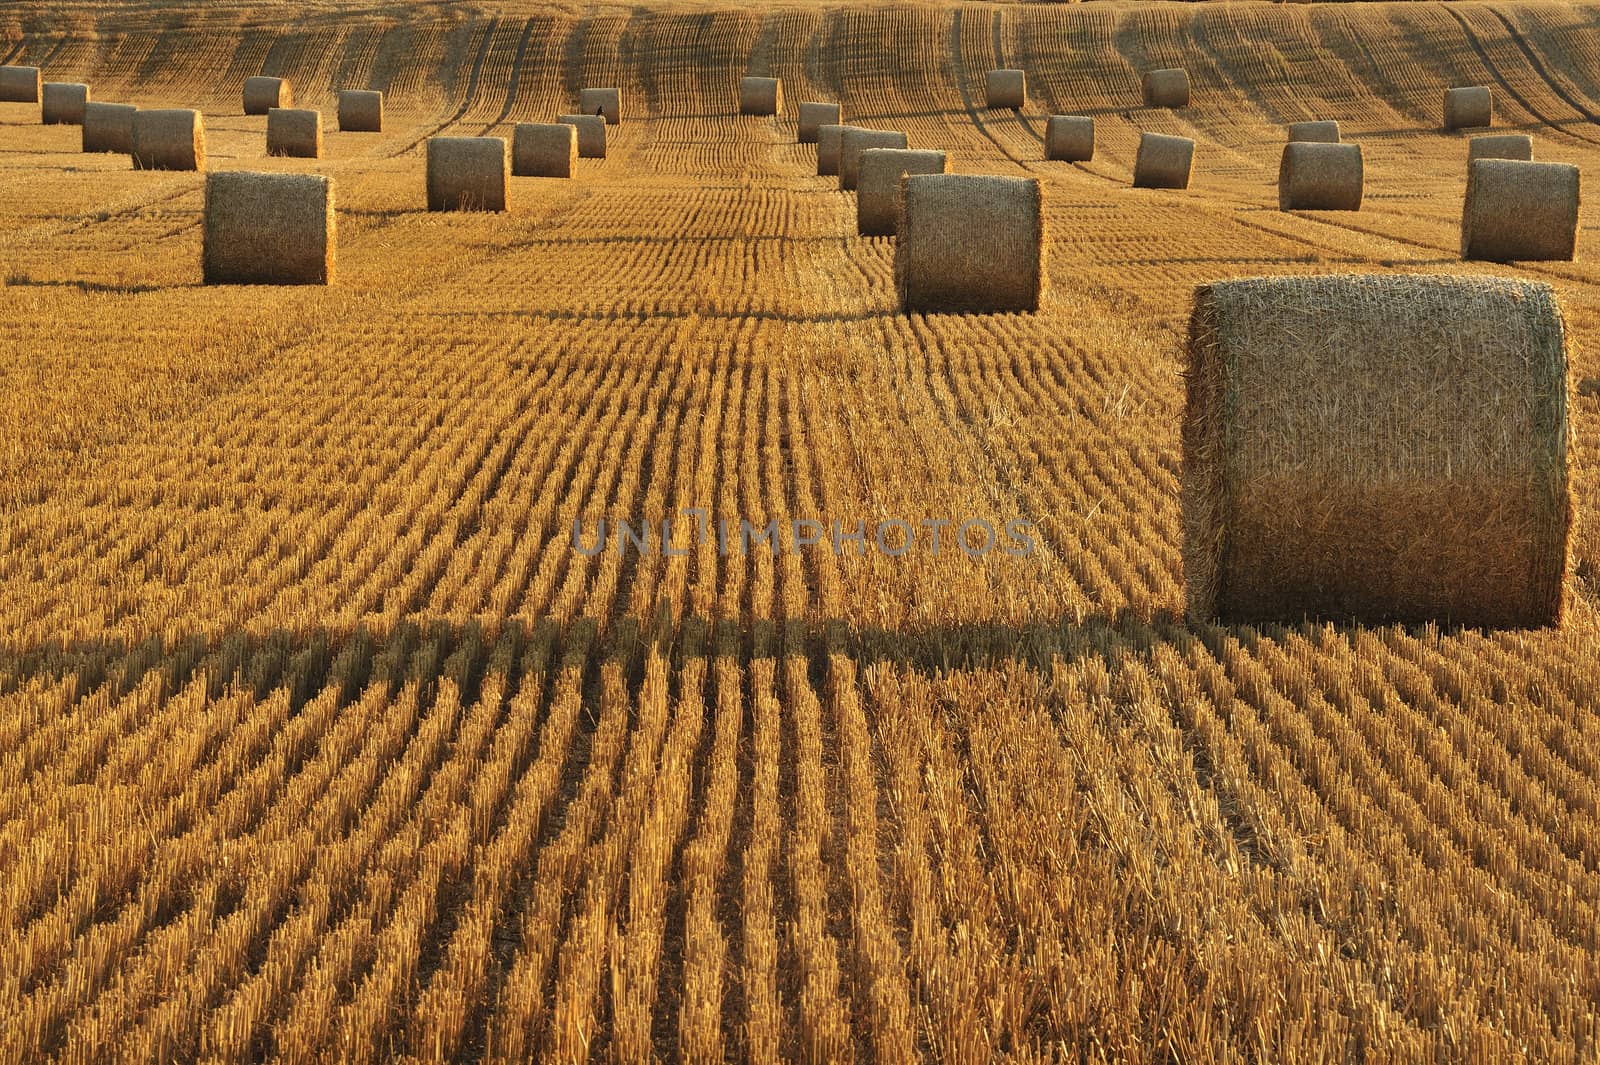 Bales of straw in a field after harvest. Taken at sunset. Space for text lower left.